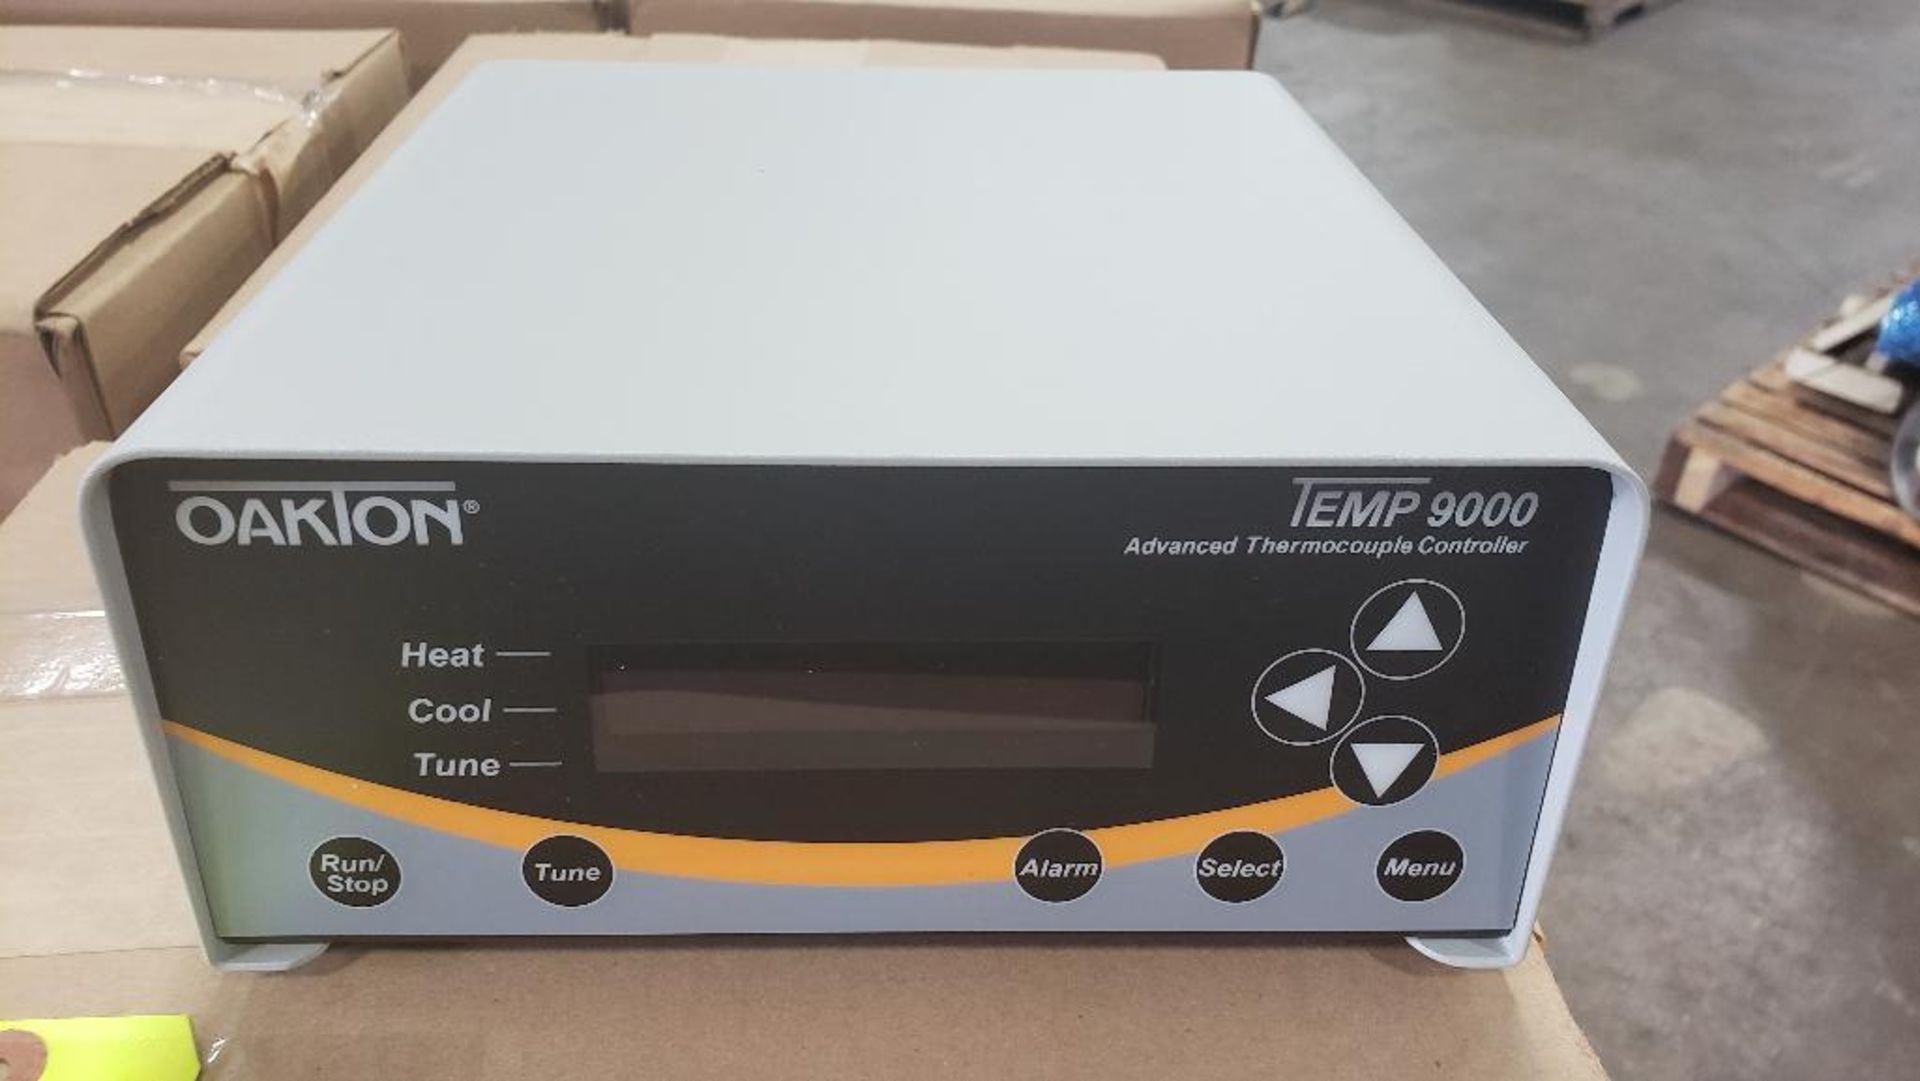 Oakton Temp 9000 model 89800-02 advanced thermocouple controller. Marked as reconditioned. - Image 2 of 4